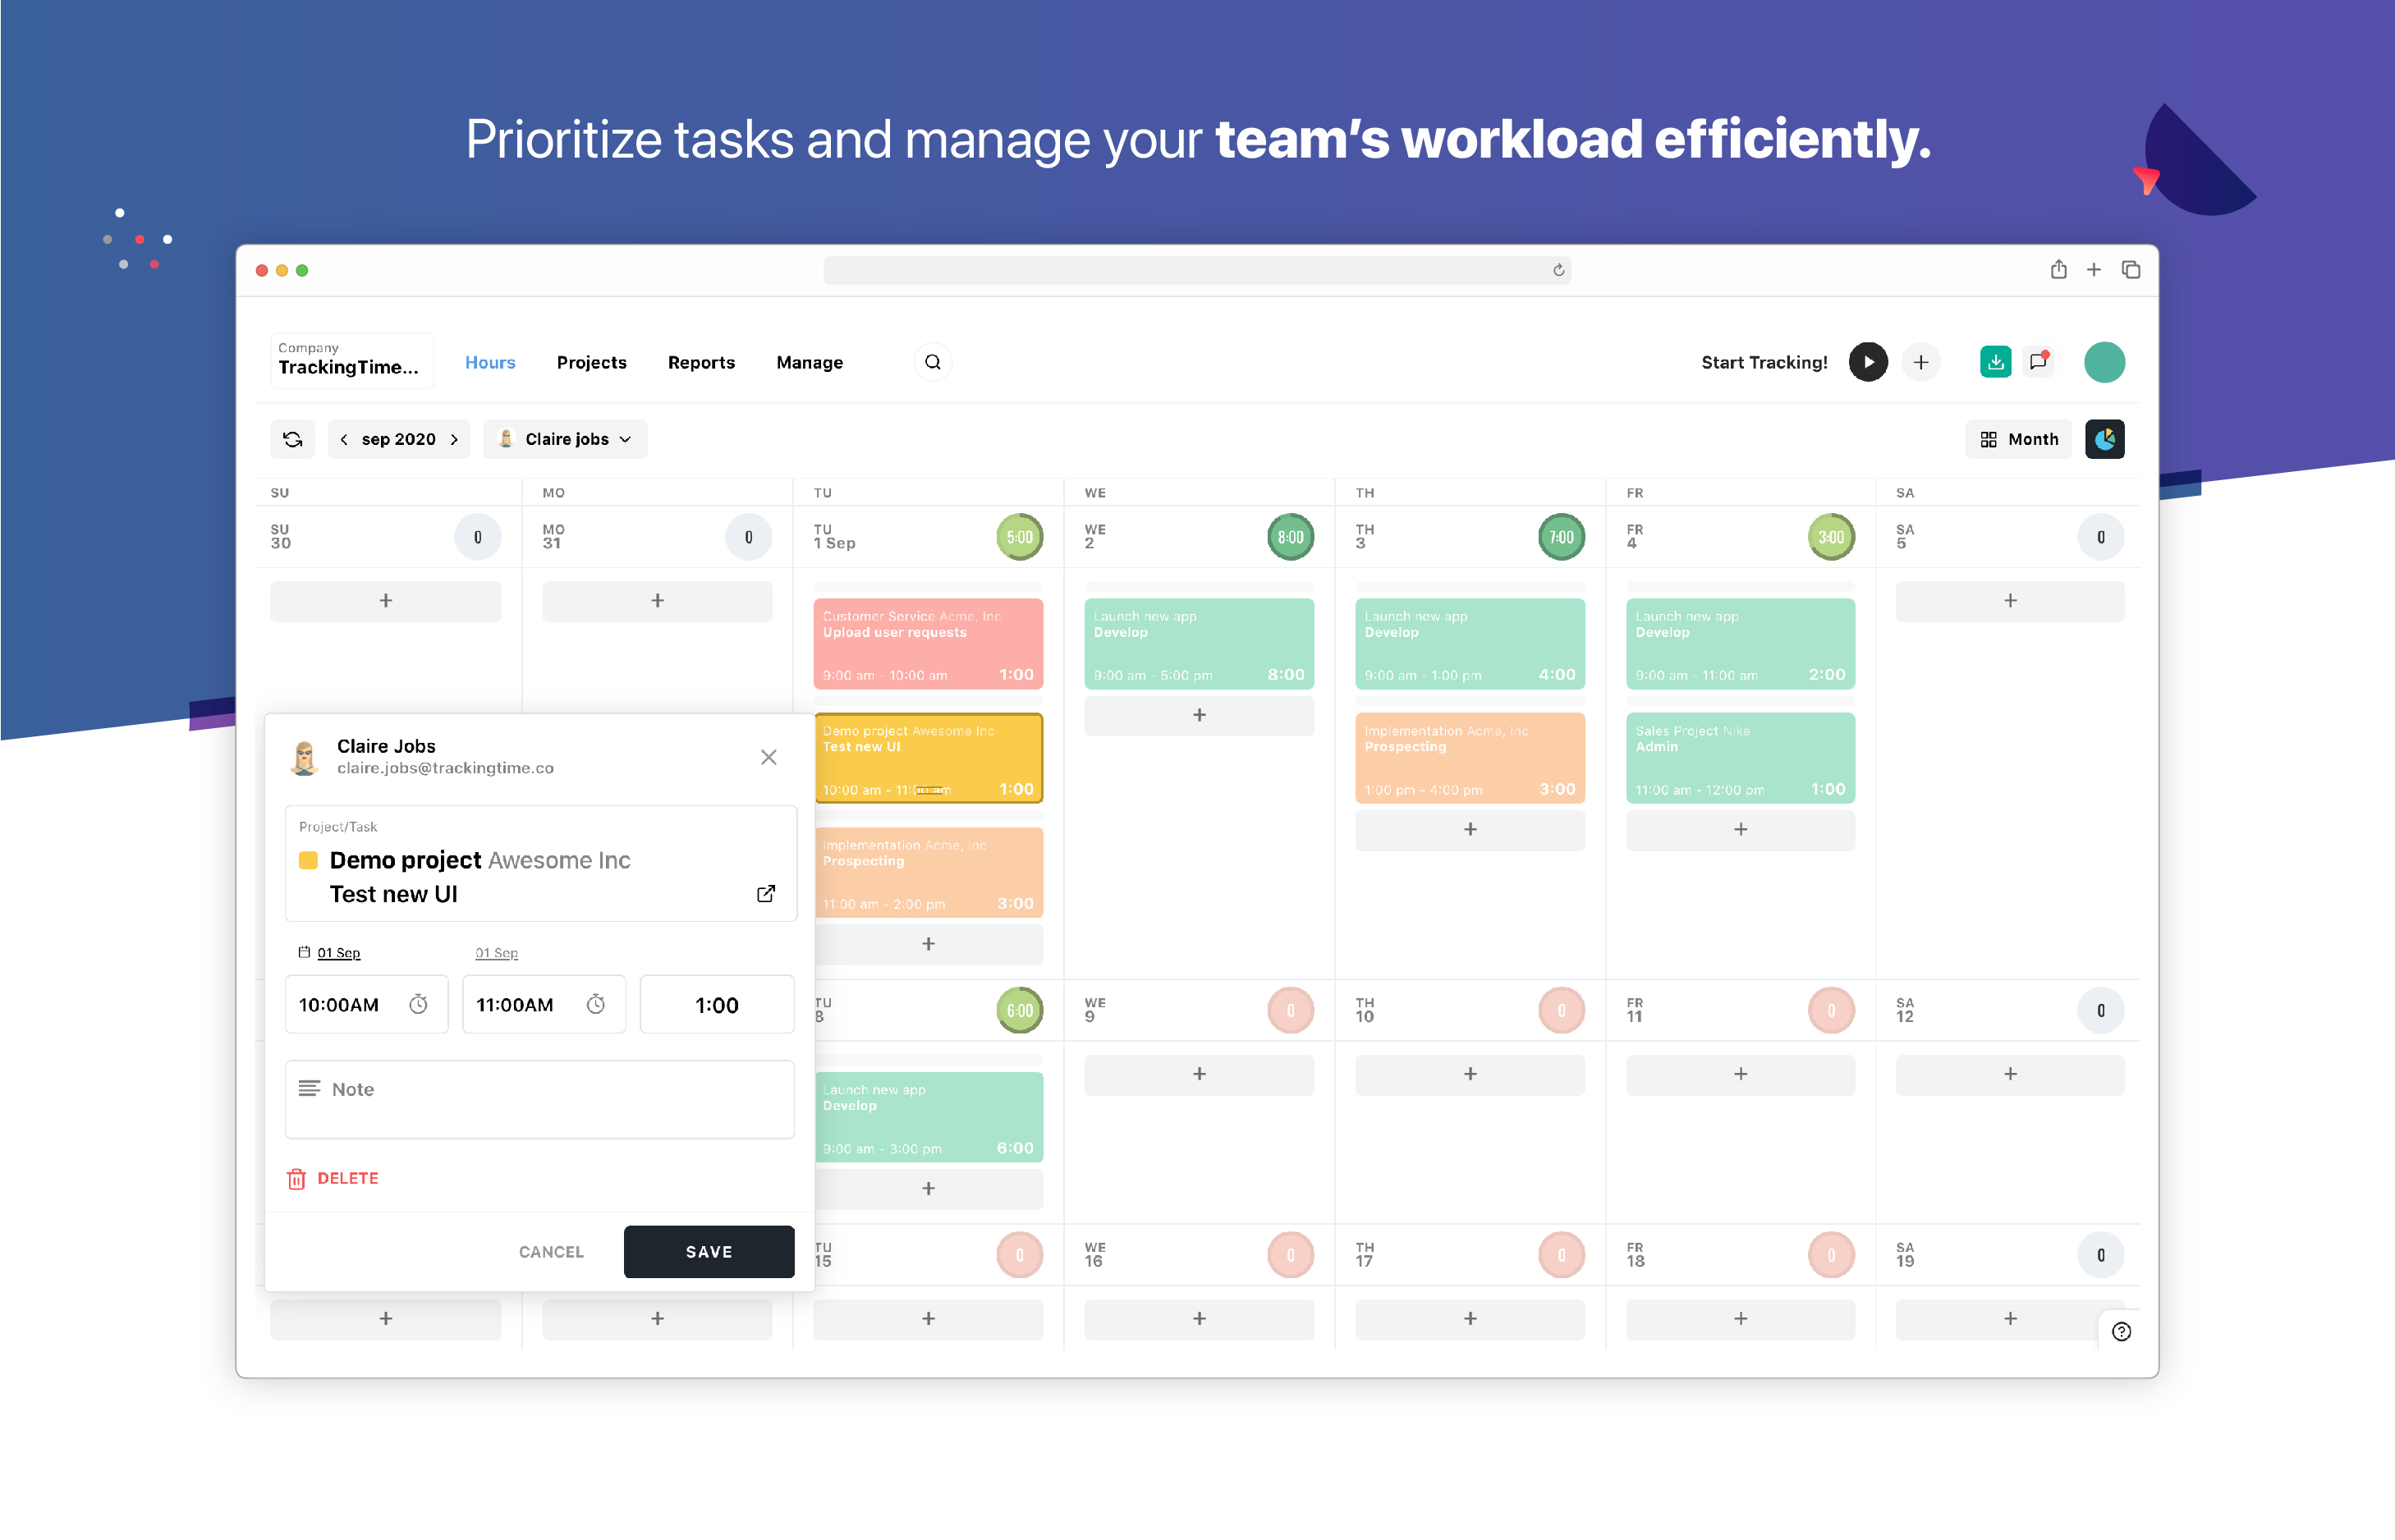 Prioritize tasks and manage your team's workload efficiently.